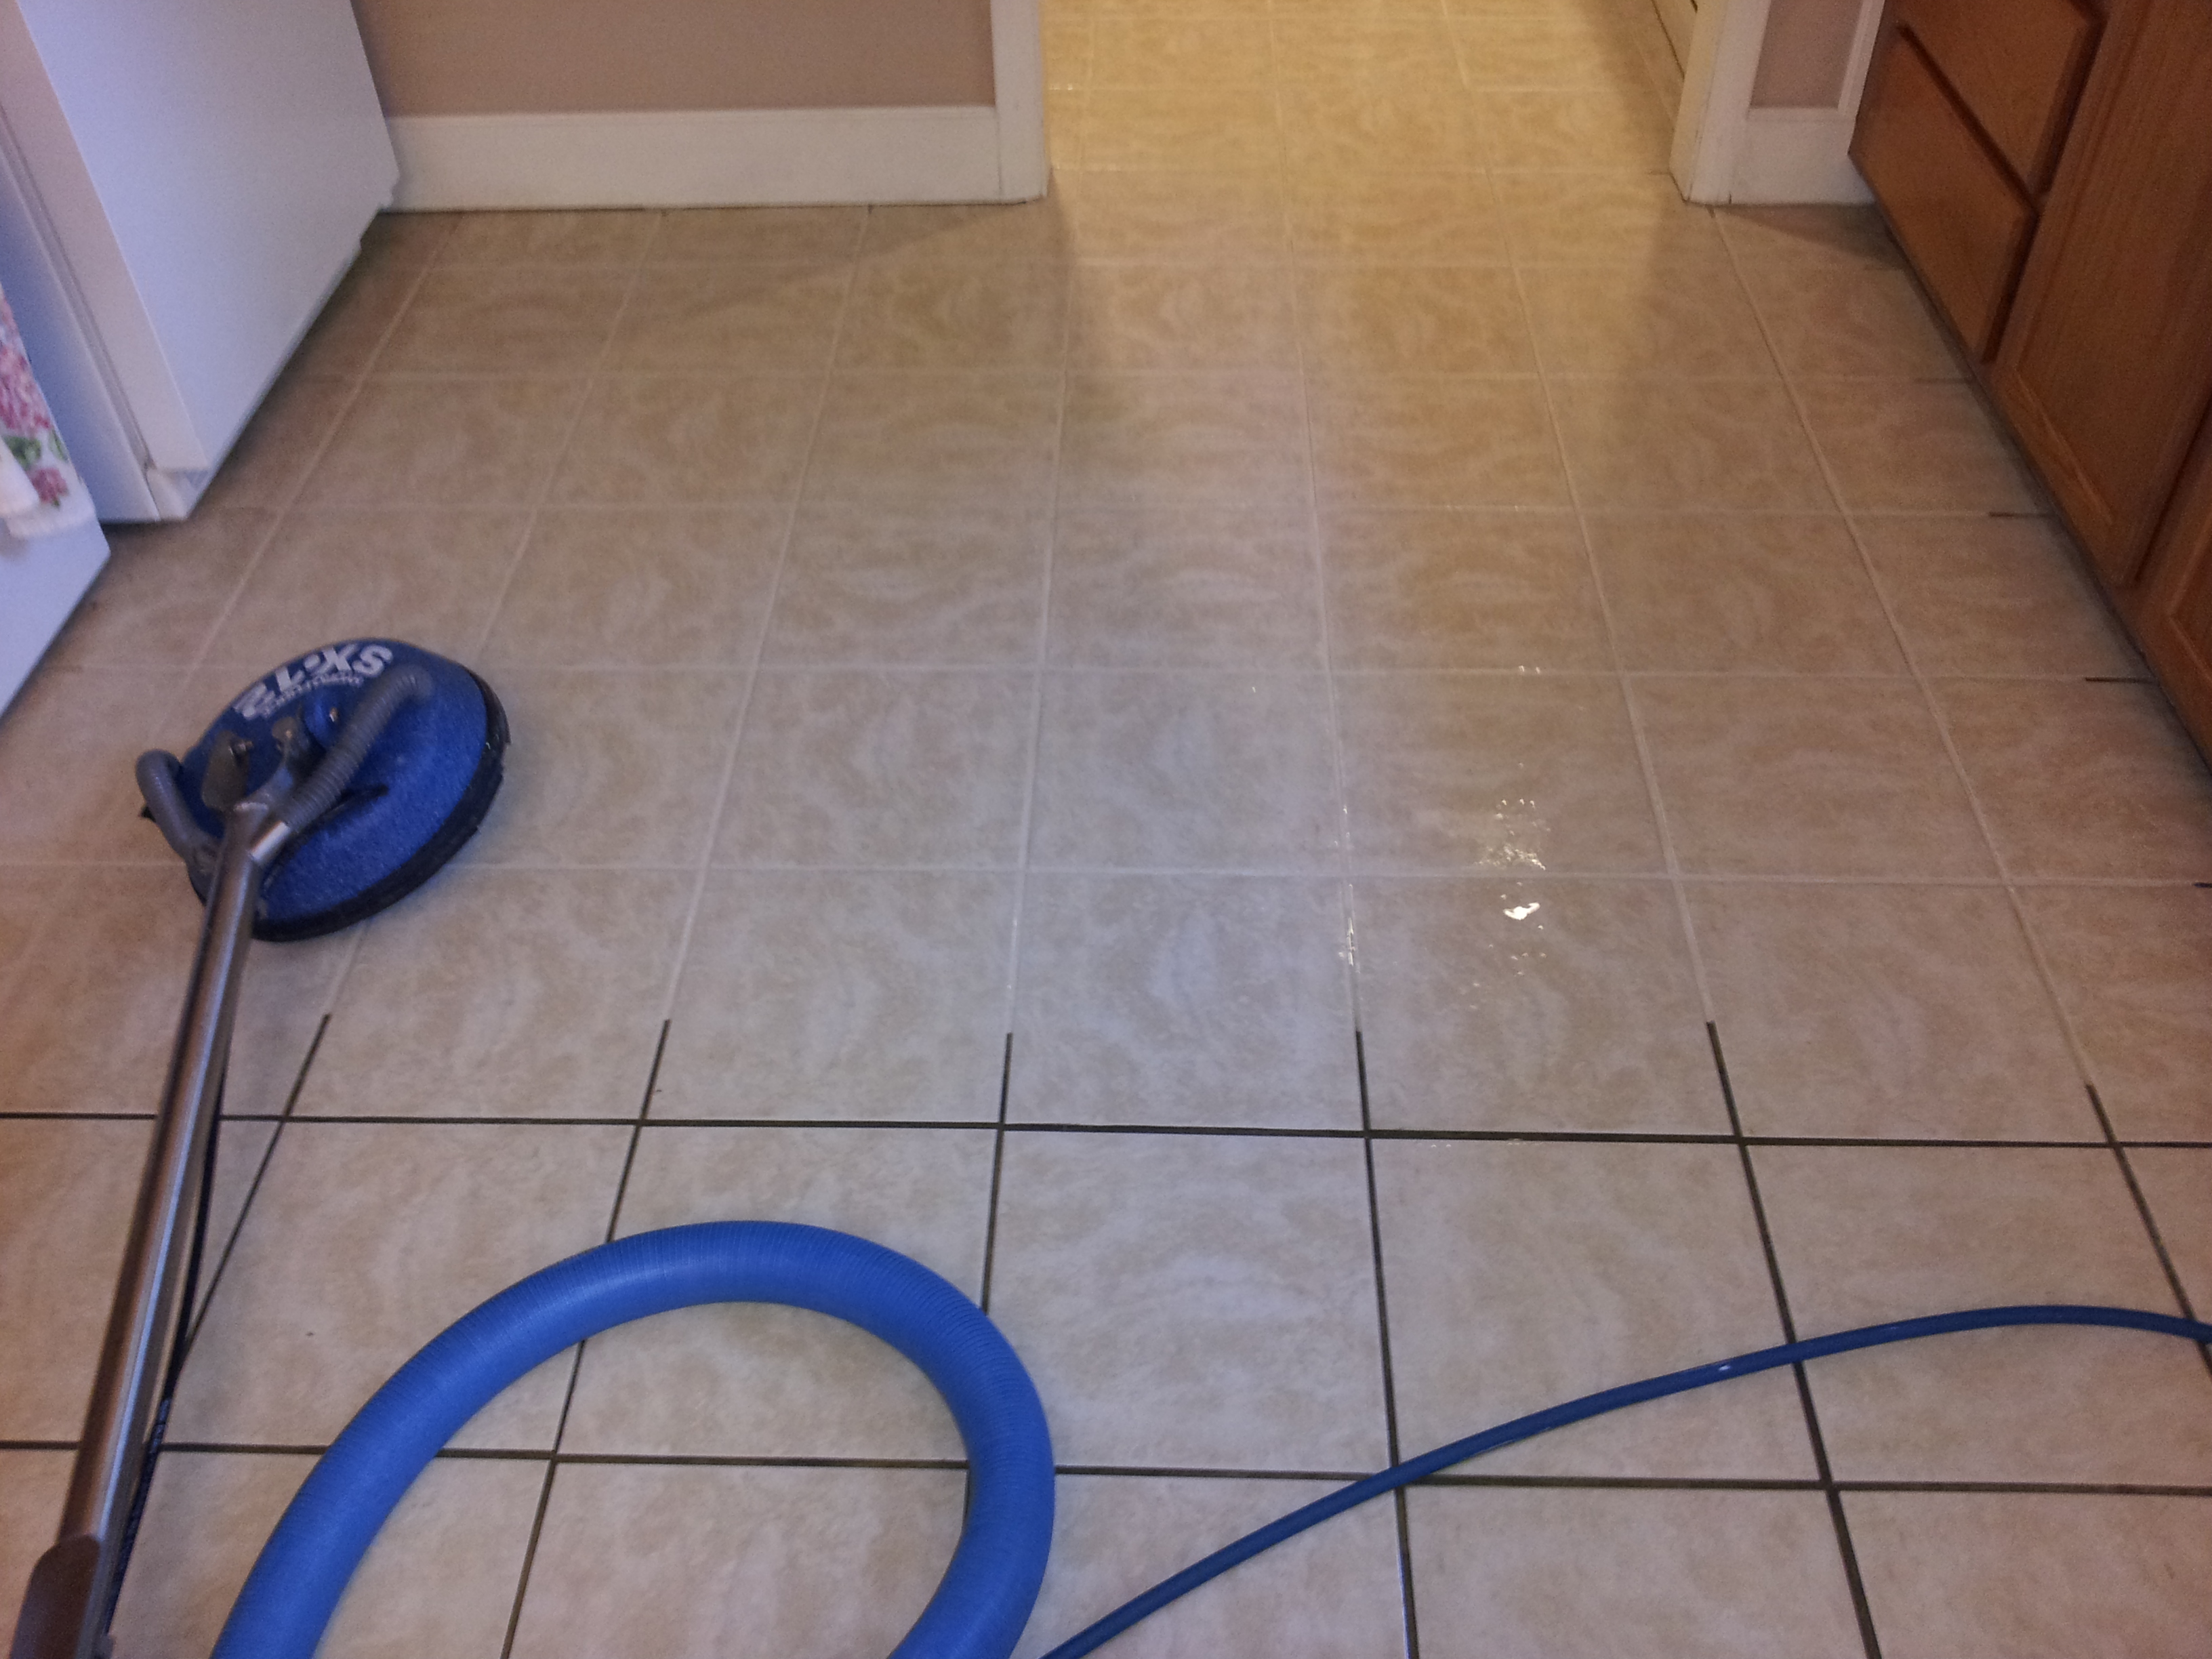 Modern How To Clean The Grout Between Ceramic Tiles for Large Space